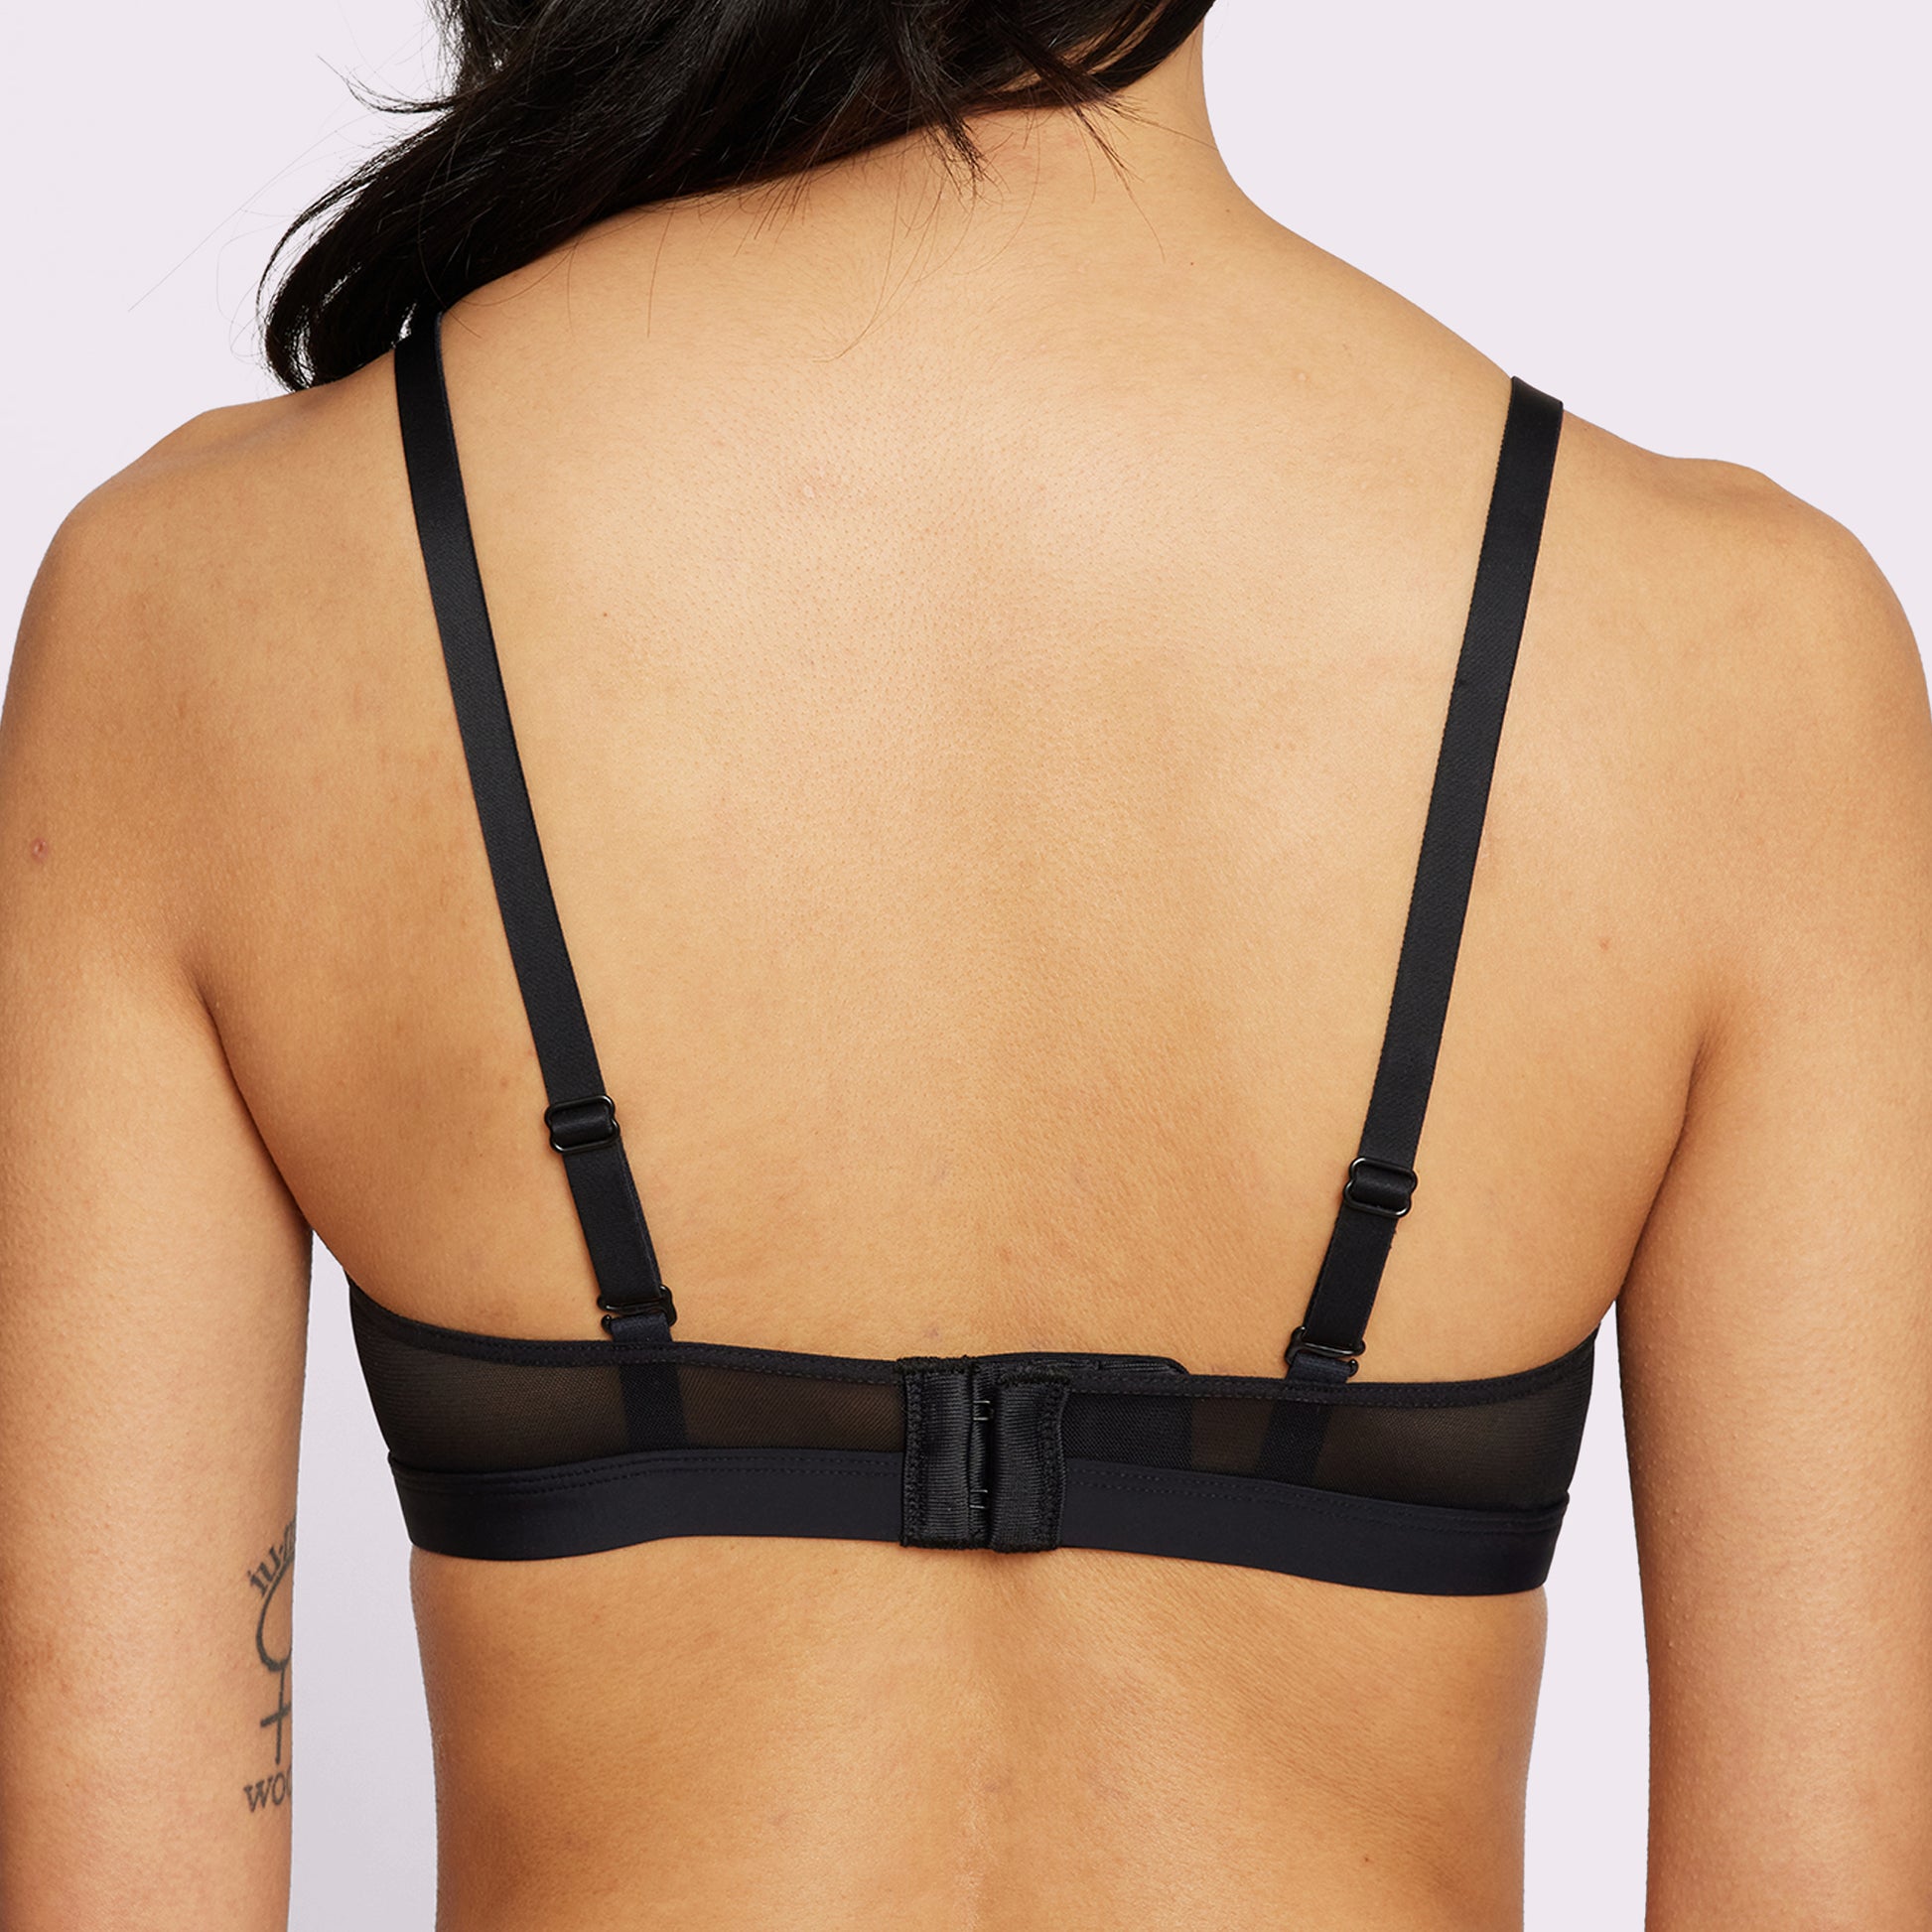 Parade Women's Re:play Triangle Wireless Bralette : Target